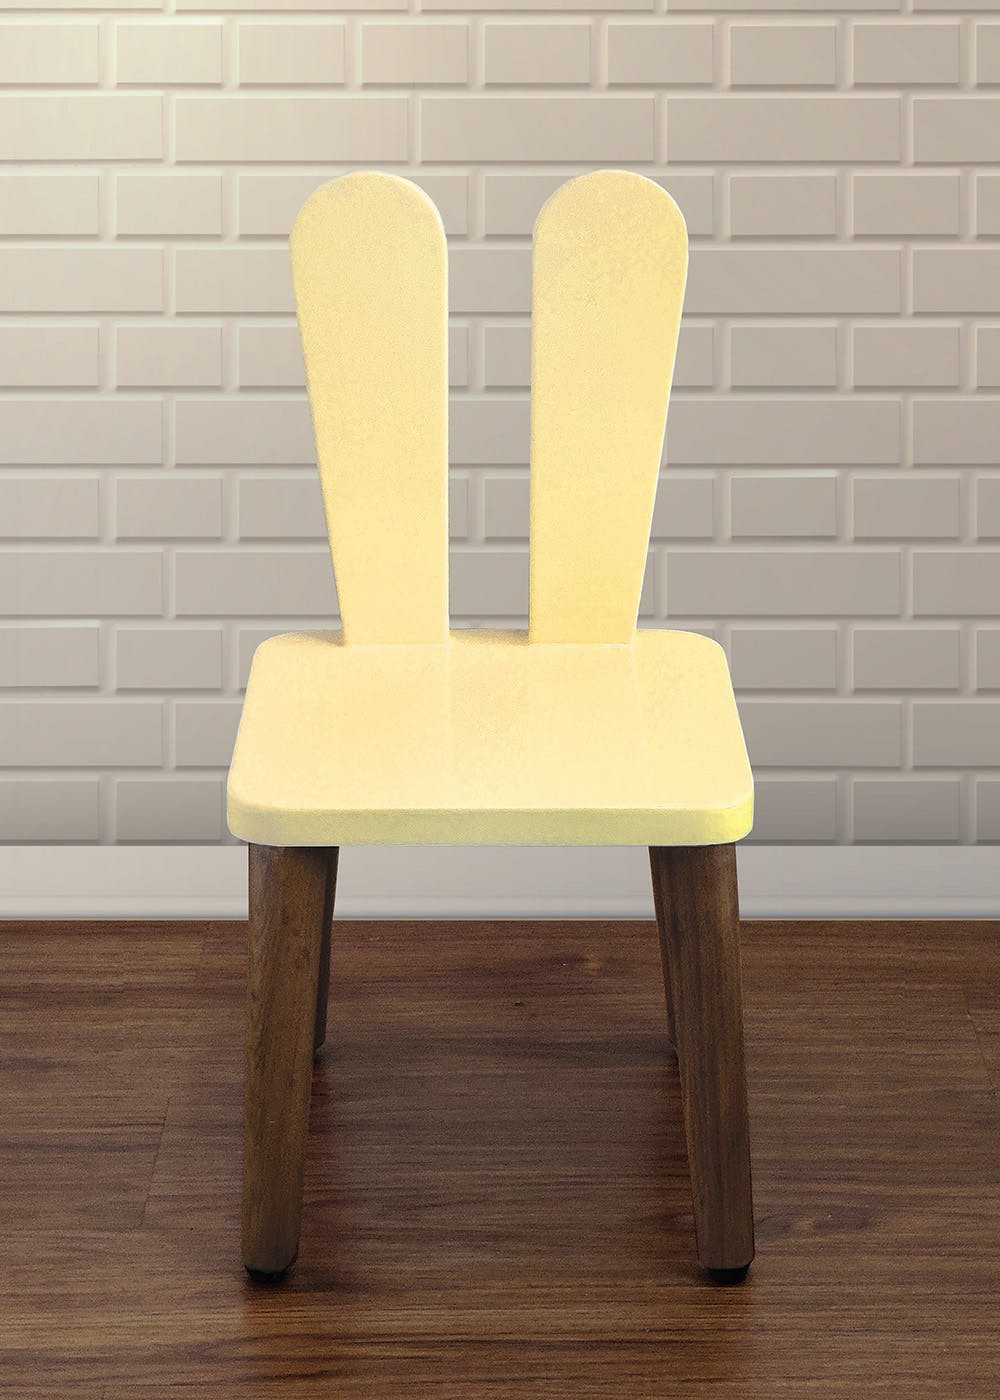  Bunny Chair for kids - Yellow